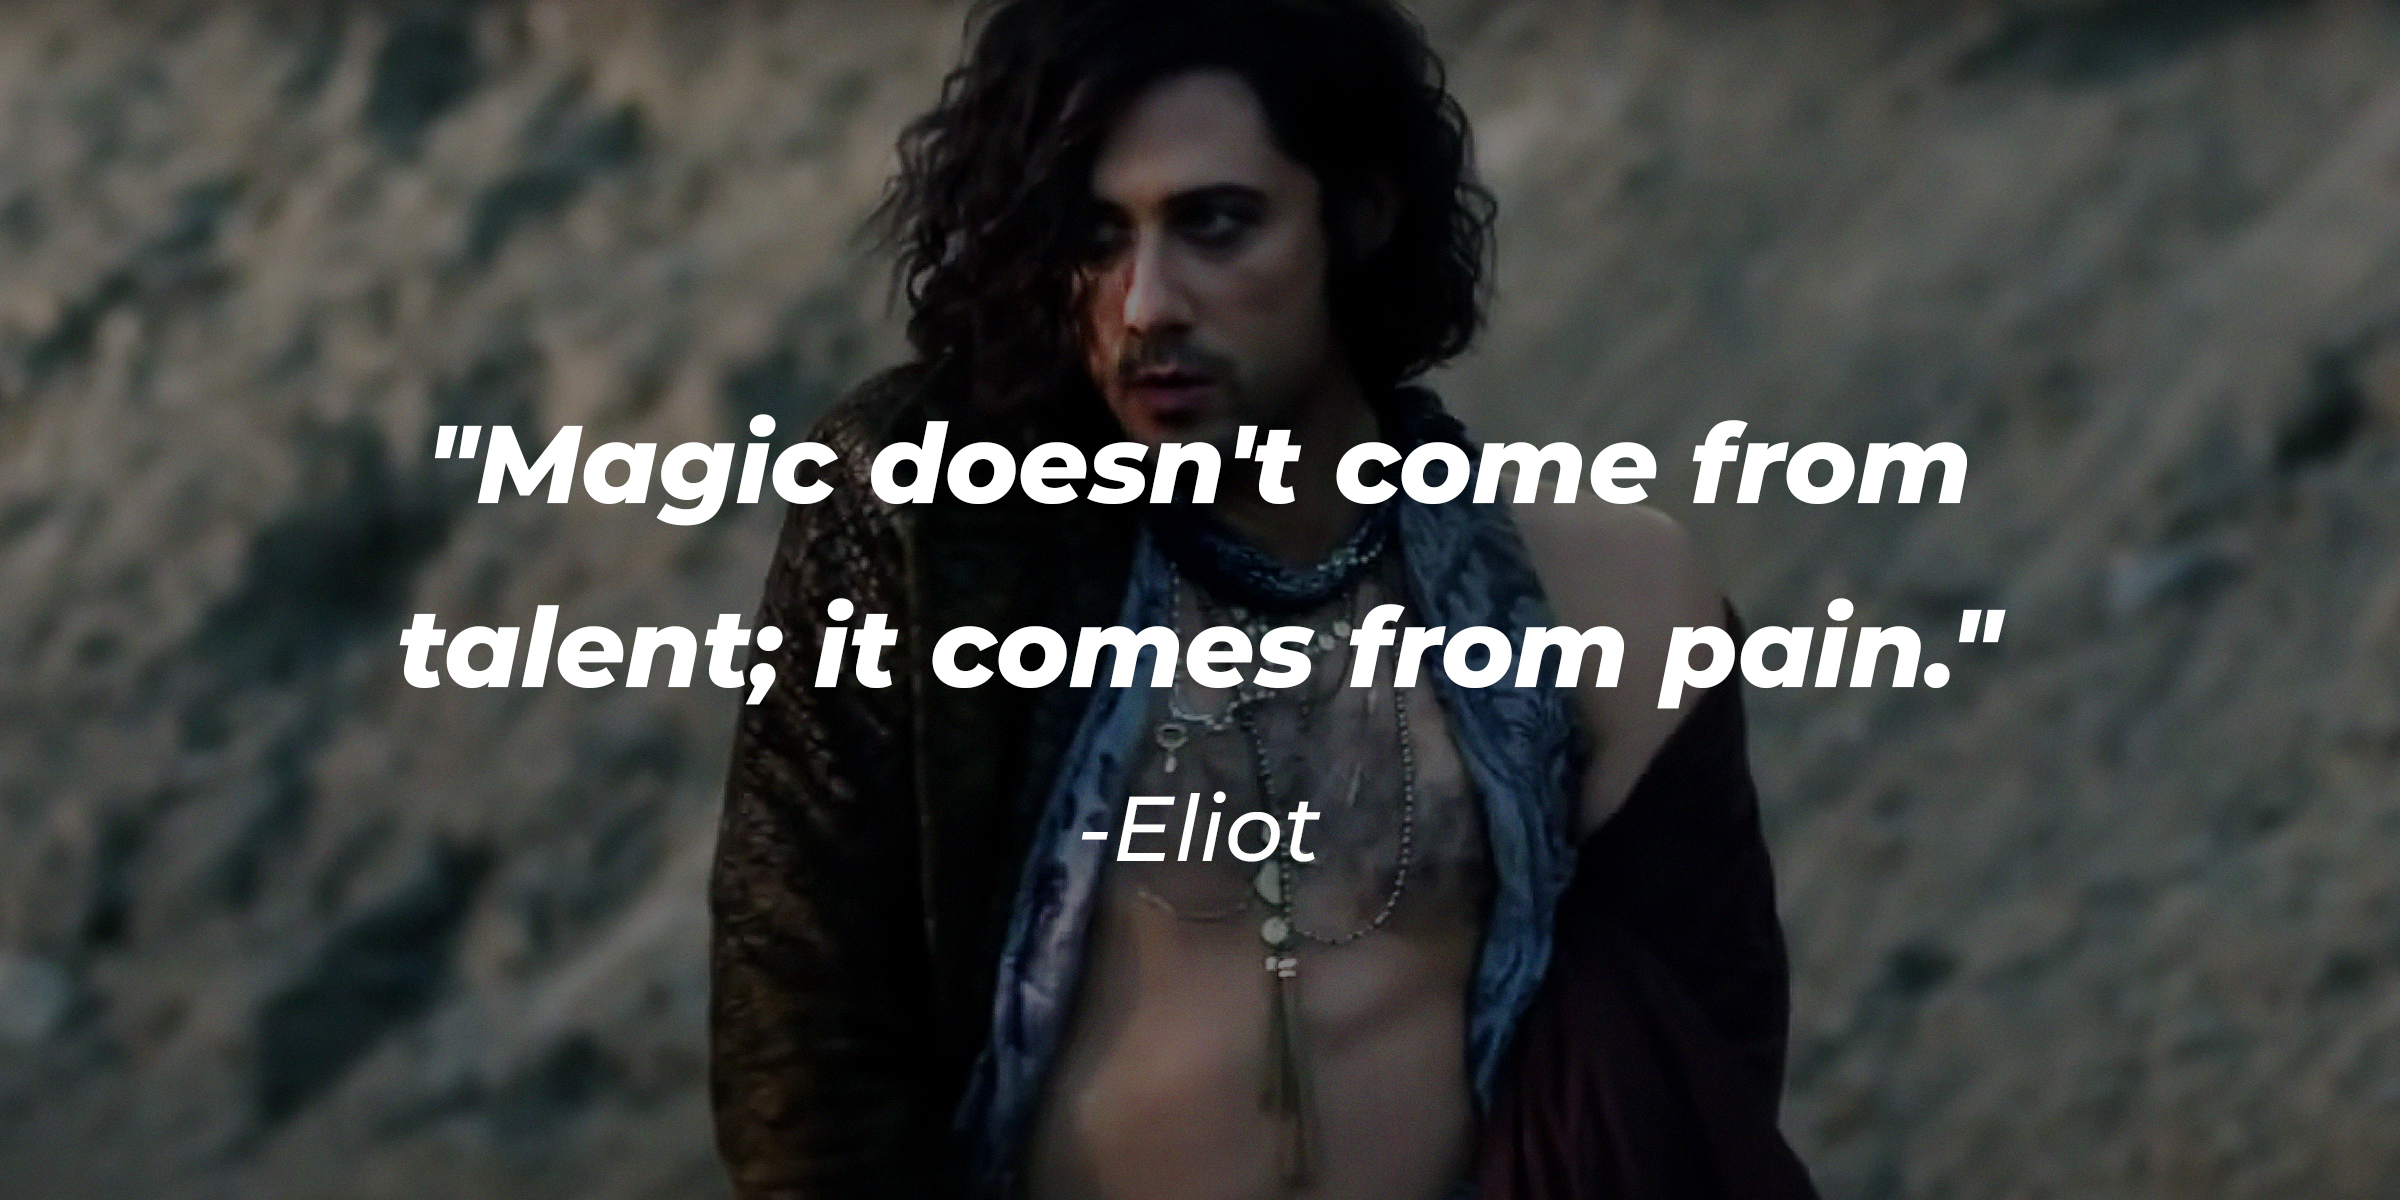 Eliot’s quote: "Magic doesn't come from talent; it comes from pain." | Source: Facebook/MagiciansSYFY